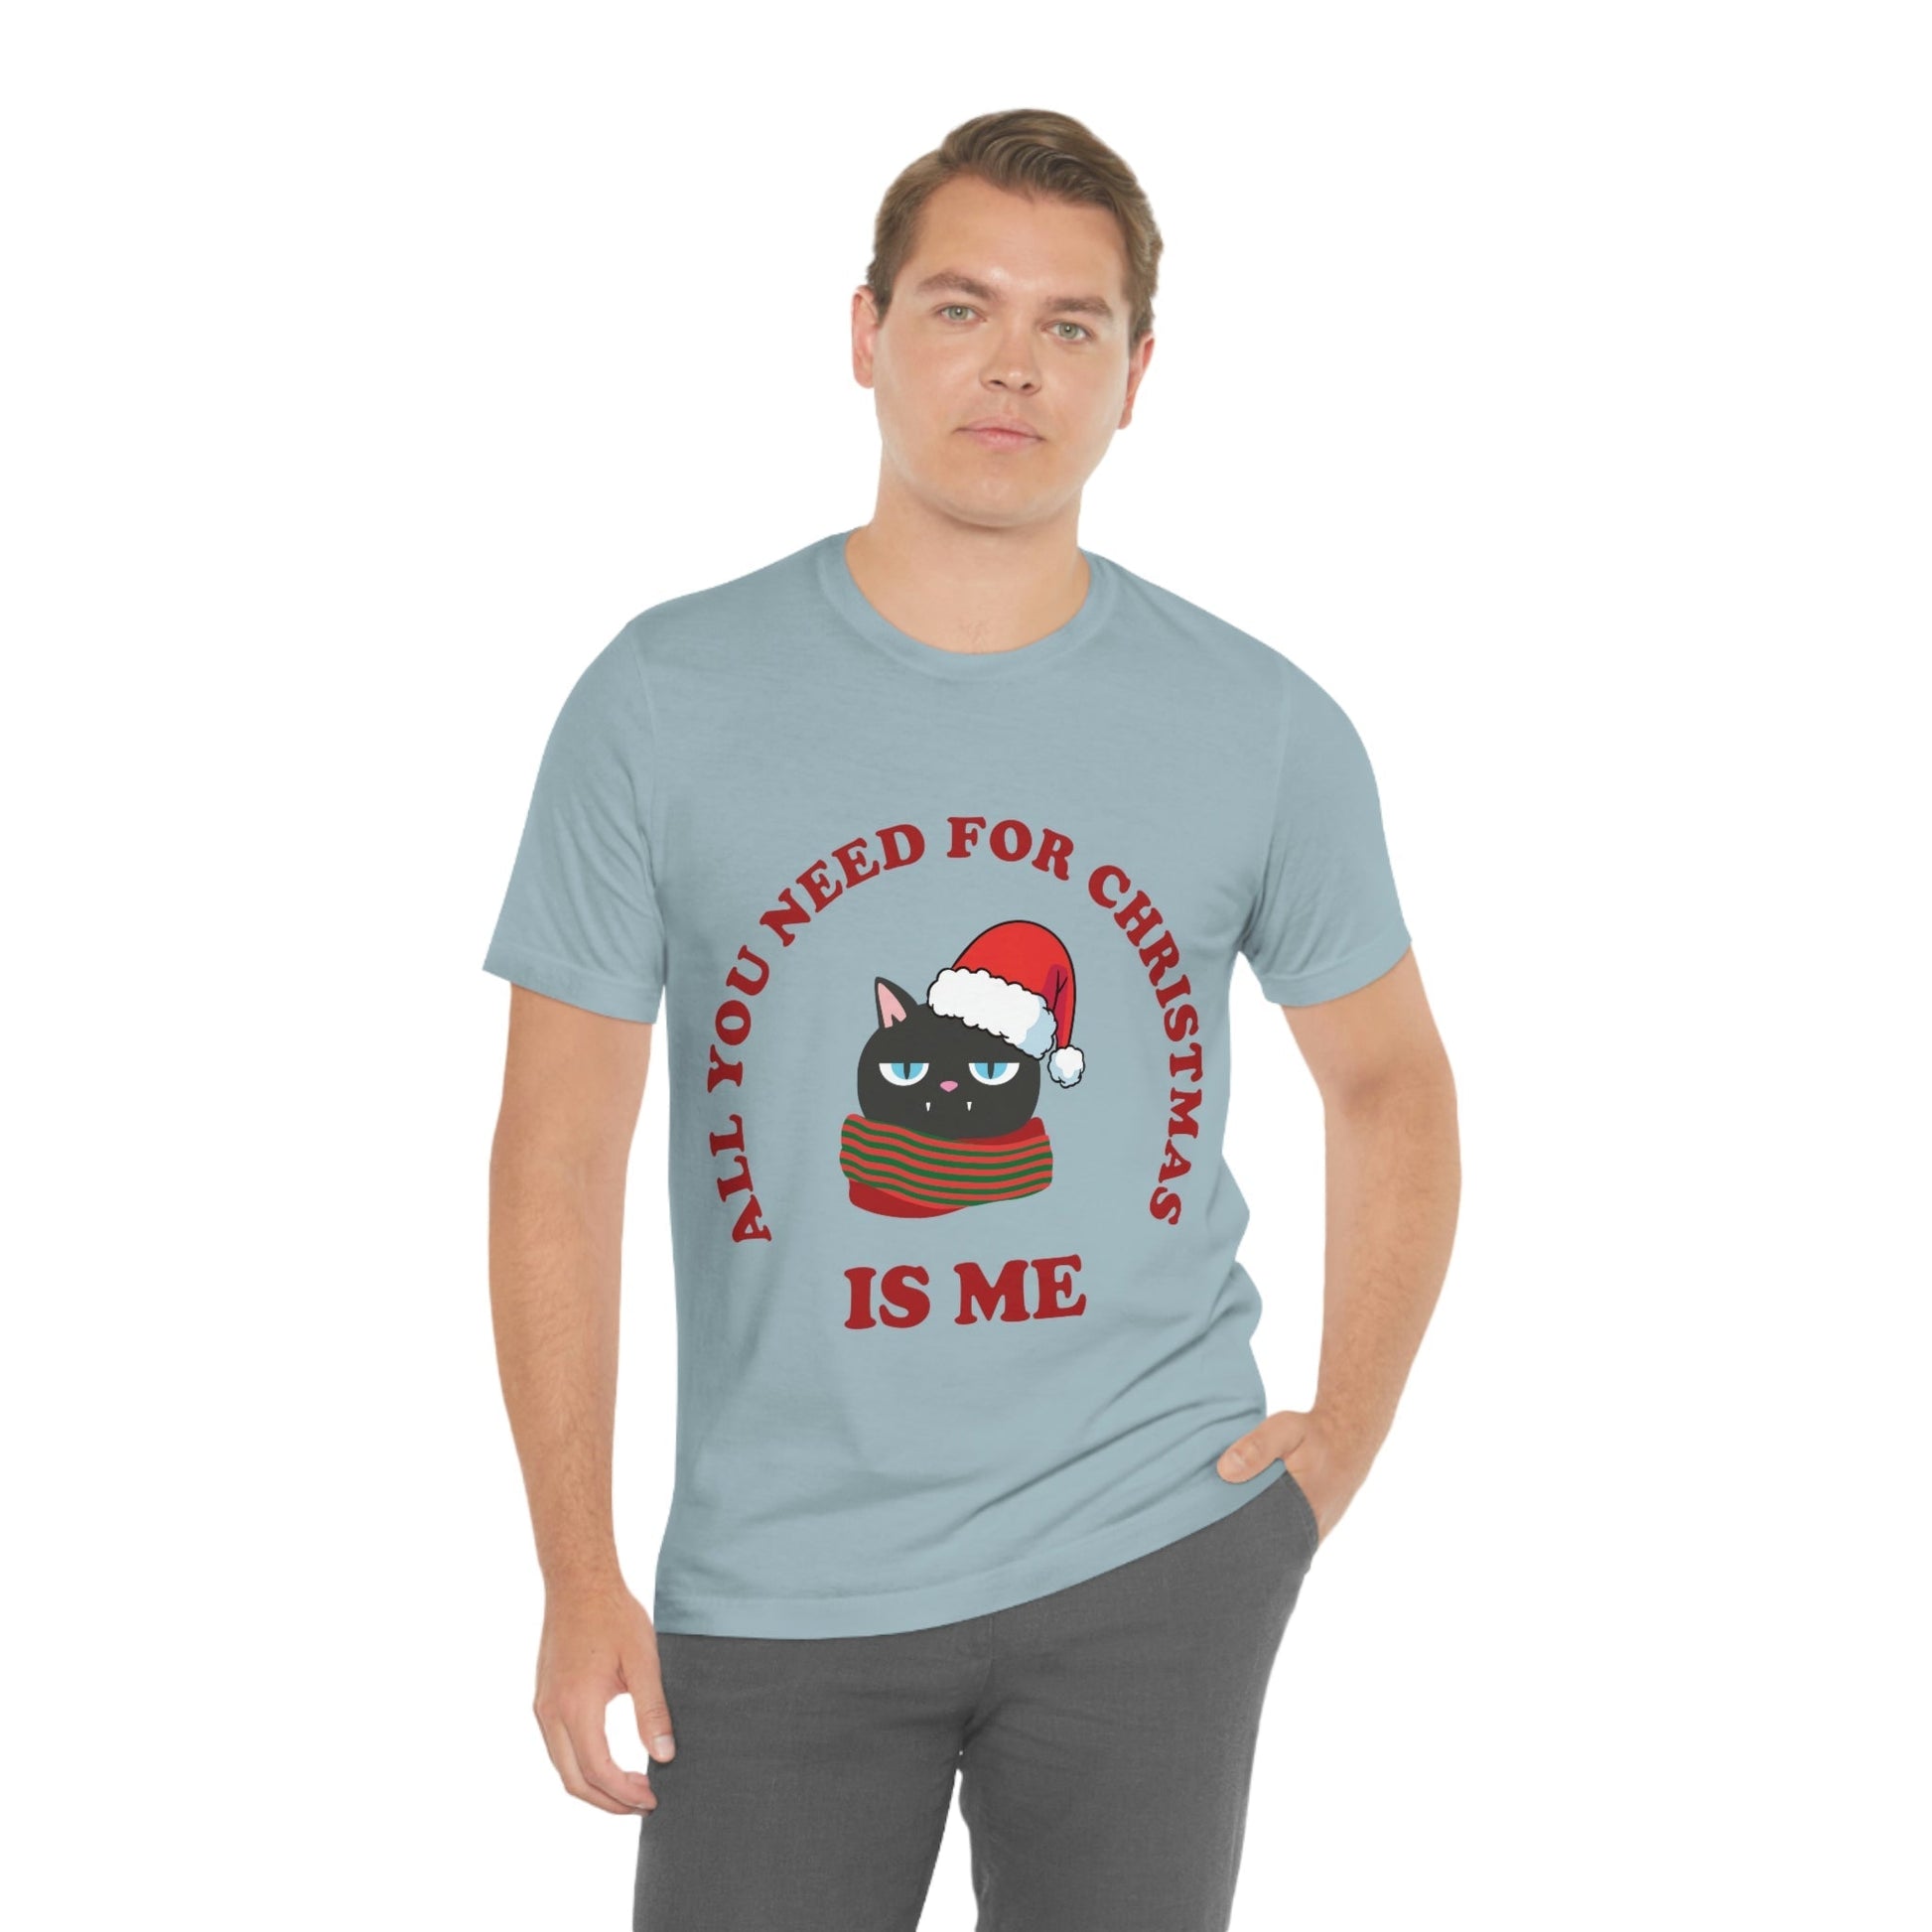 All You Need for Christmas is Me Grumpy Cat Unisex Jersey Short Sleeve T-Shirt Ichaku [Perfect Gifts Selection]